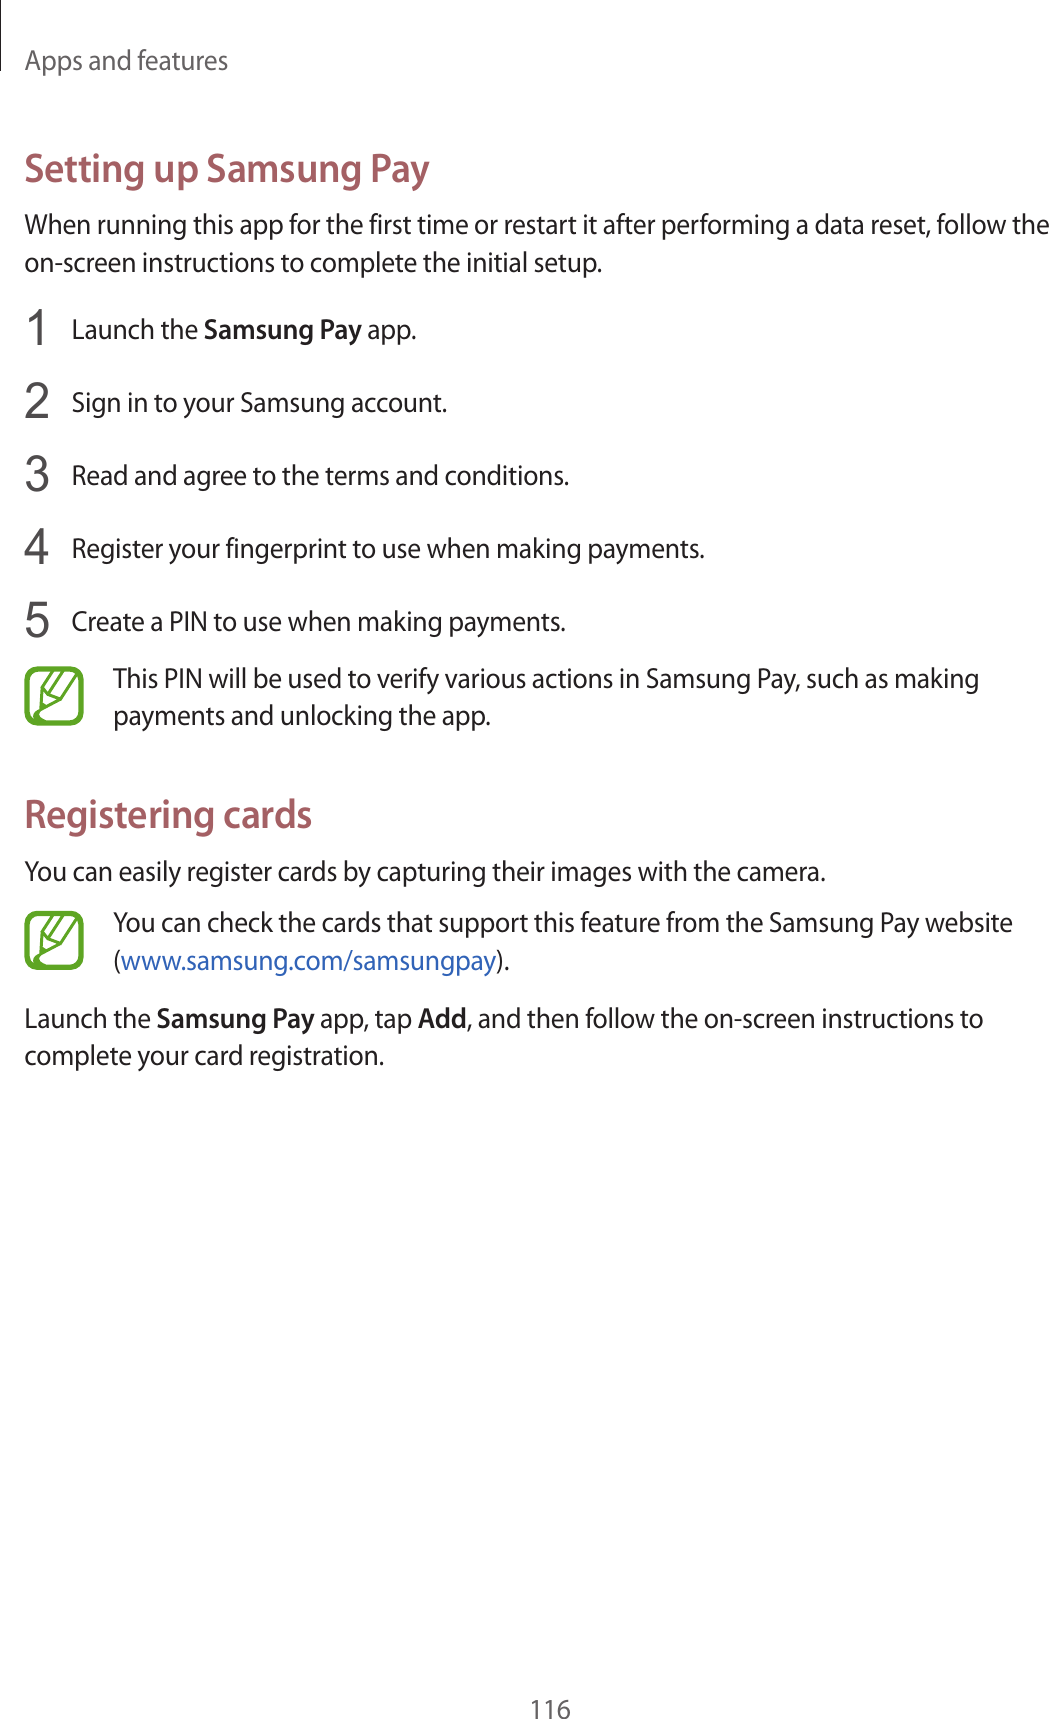 Apps and features116Setting up Samsung PayWhen running this app for the first time or restart it after performing a data reset, follow the on-screen instructions to complete the initial setup.1  Launch the Samsung Pay app.2  Sign in to your Samsung account.3  Read and agree to the terms and conditions.4  Register your fingerprint to use when making payments.5  Create a PIN to use when making payments.This PIN will be used to verify various actions in Samsung Pay, such as making payments and unlocking the app.Registering cardsYou can easily register cards by capturing their images with the camera.You can check the cards that support this feature from the Samsung Pay website (www.samsung.com/samsungpay).Launch the Samsung Pay app, tap Add, and then follow the on-screen instructions to complete your card registration.